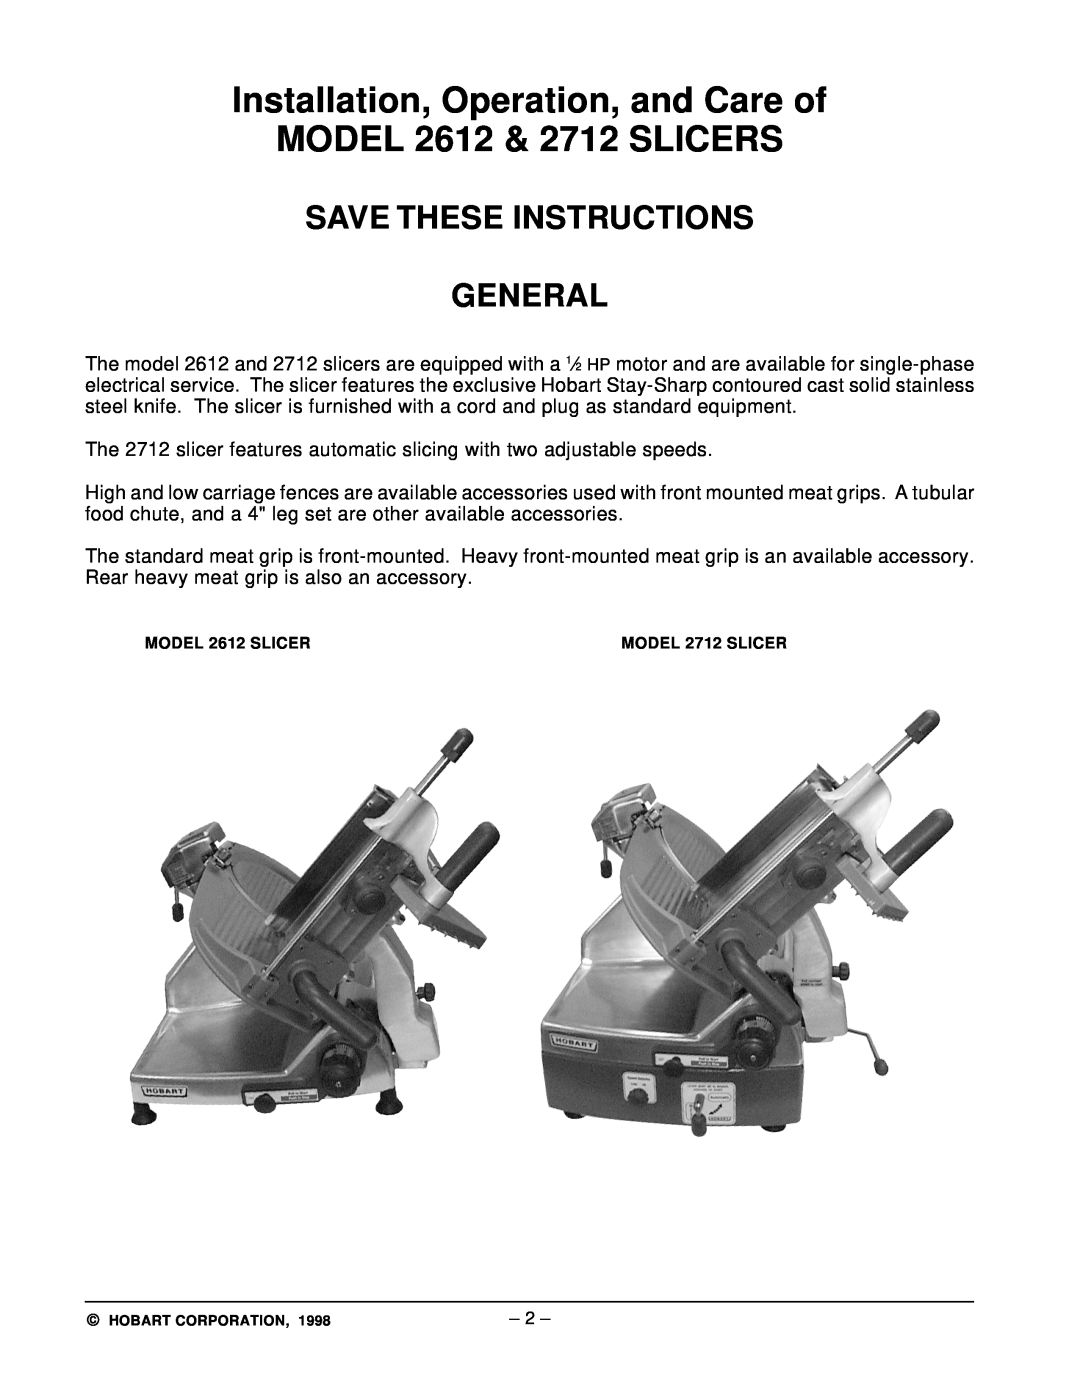 Hobart ML-104822 manual Save These Instructions General, Installation, Operation, and Care of MODEL 2612 & 2712 SLICERS 